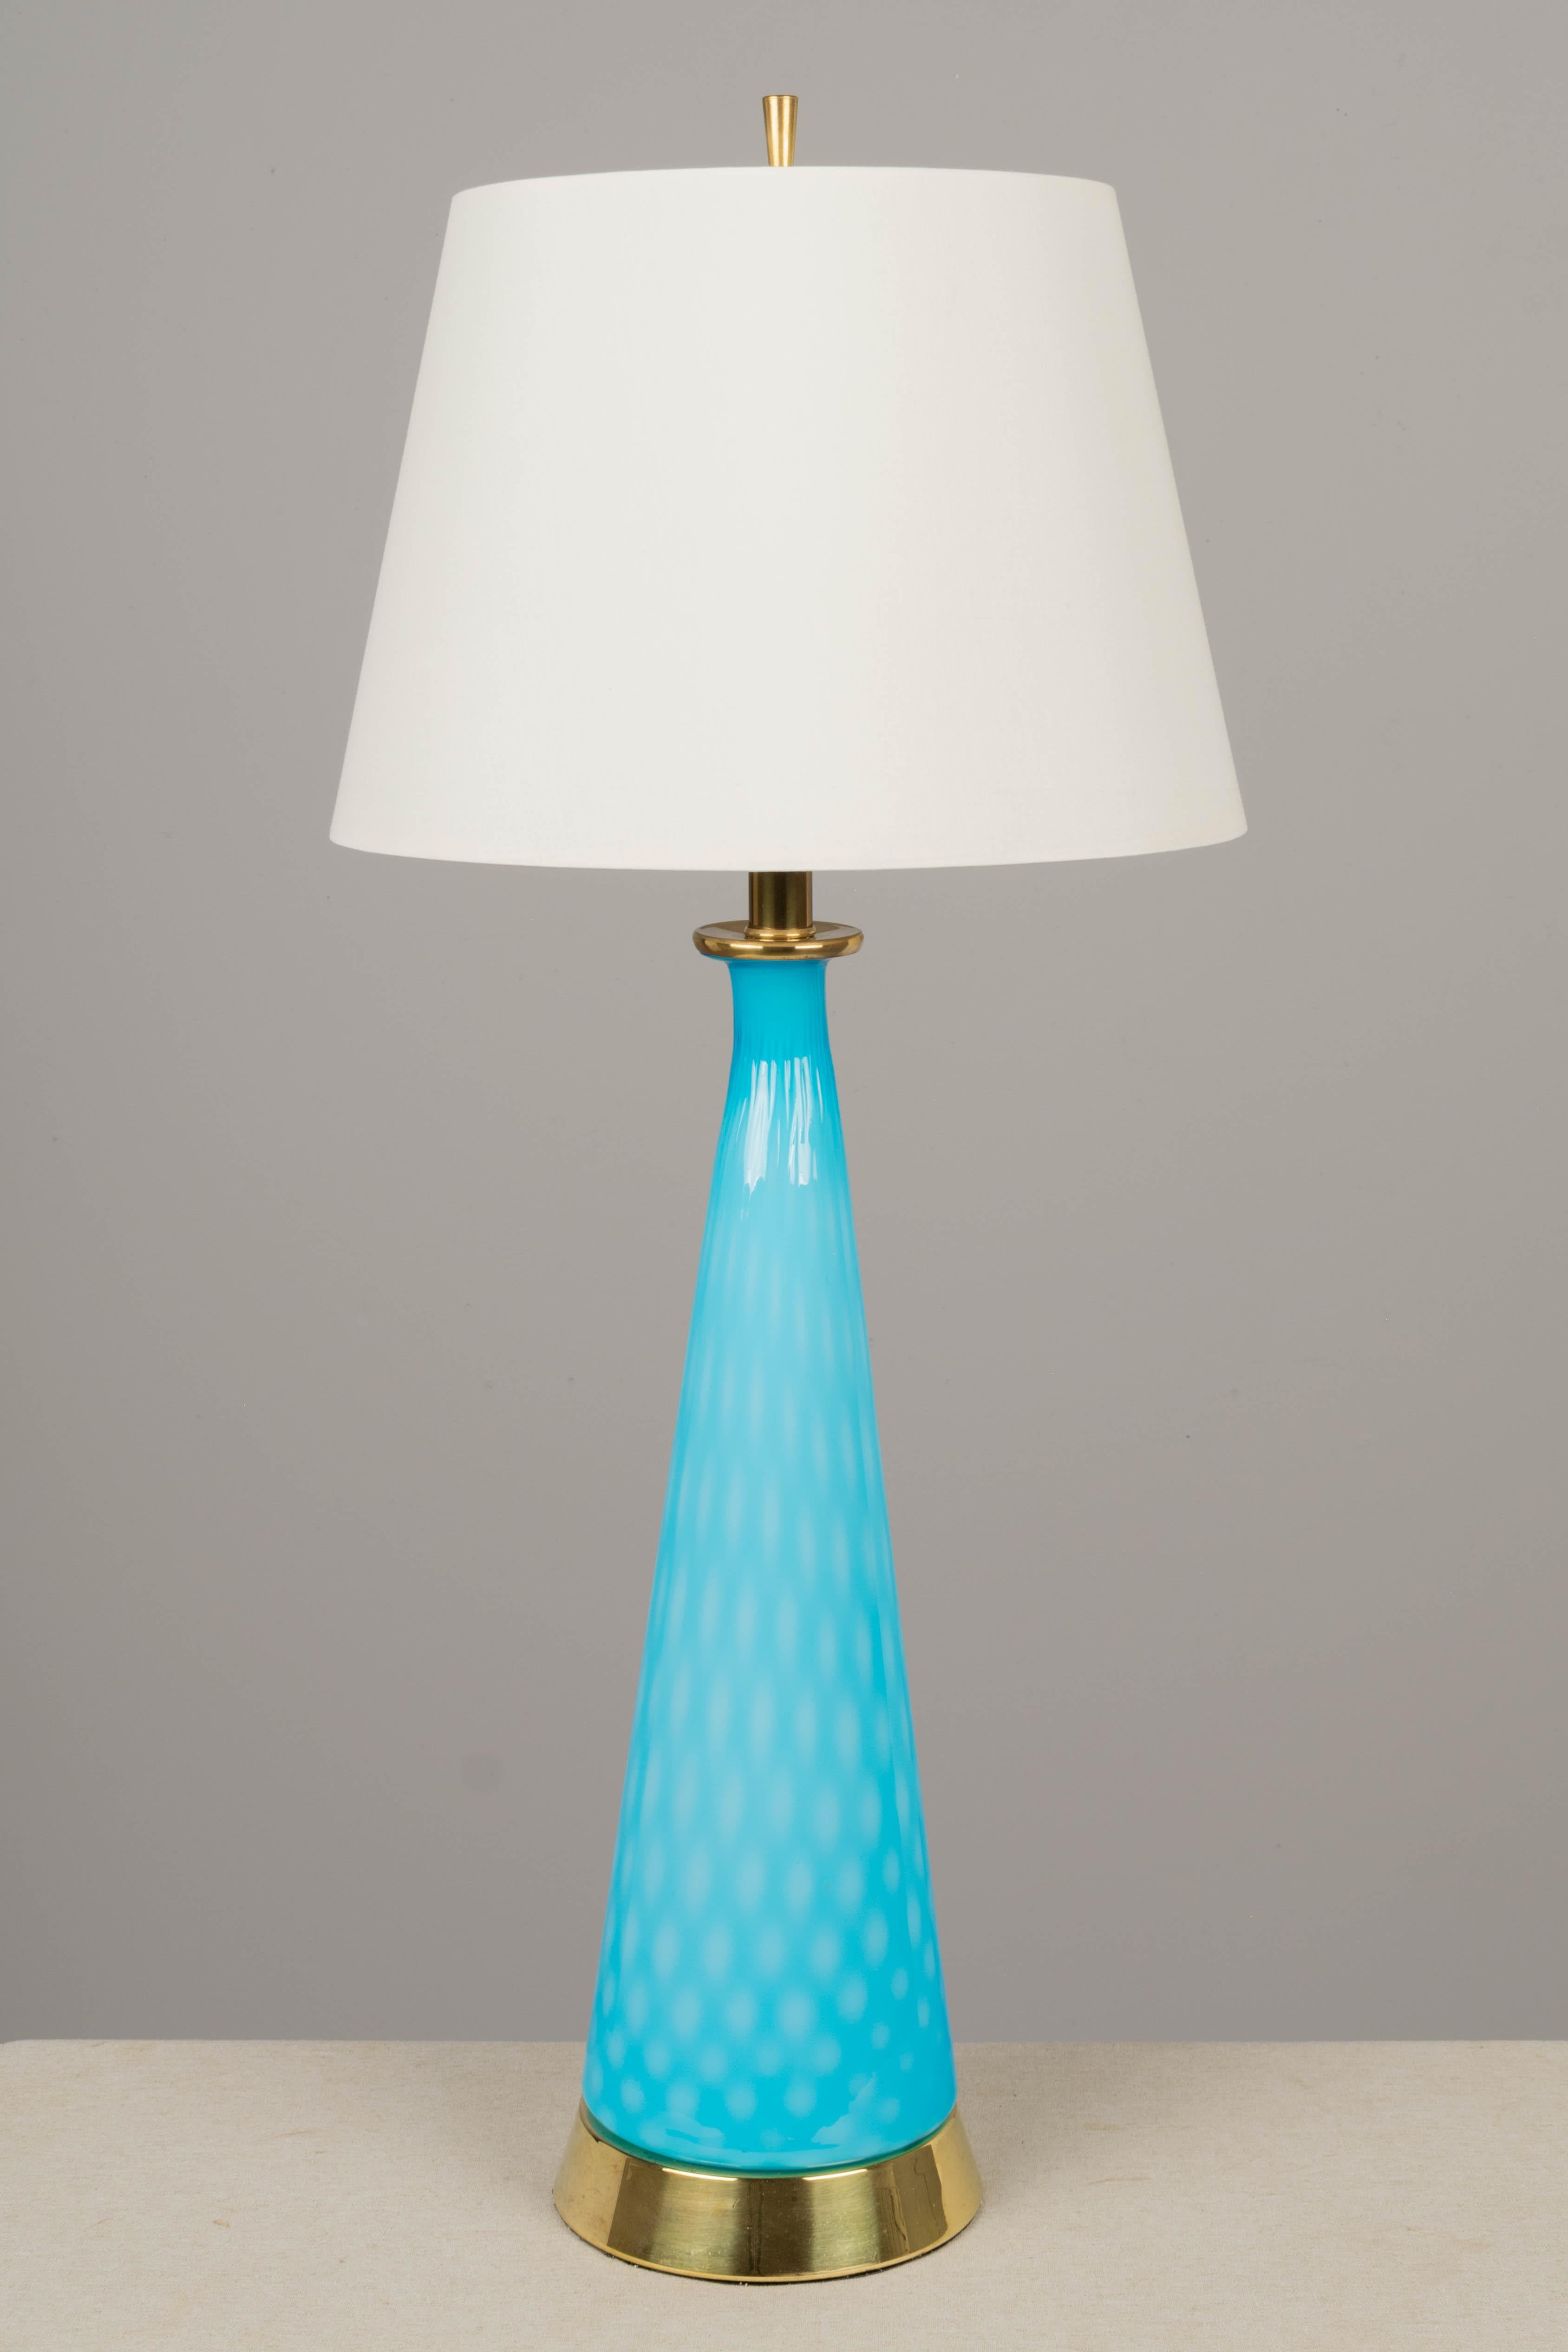 A Midcentury Modern Murano glass lamp with tall bottle form cased glass in bright aqua blue color. Original brass plated base. Rewired with new socket and cord. Shade is NOT included. Circa 1950-1970
Overall dimensions with the shade: 33.25